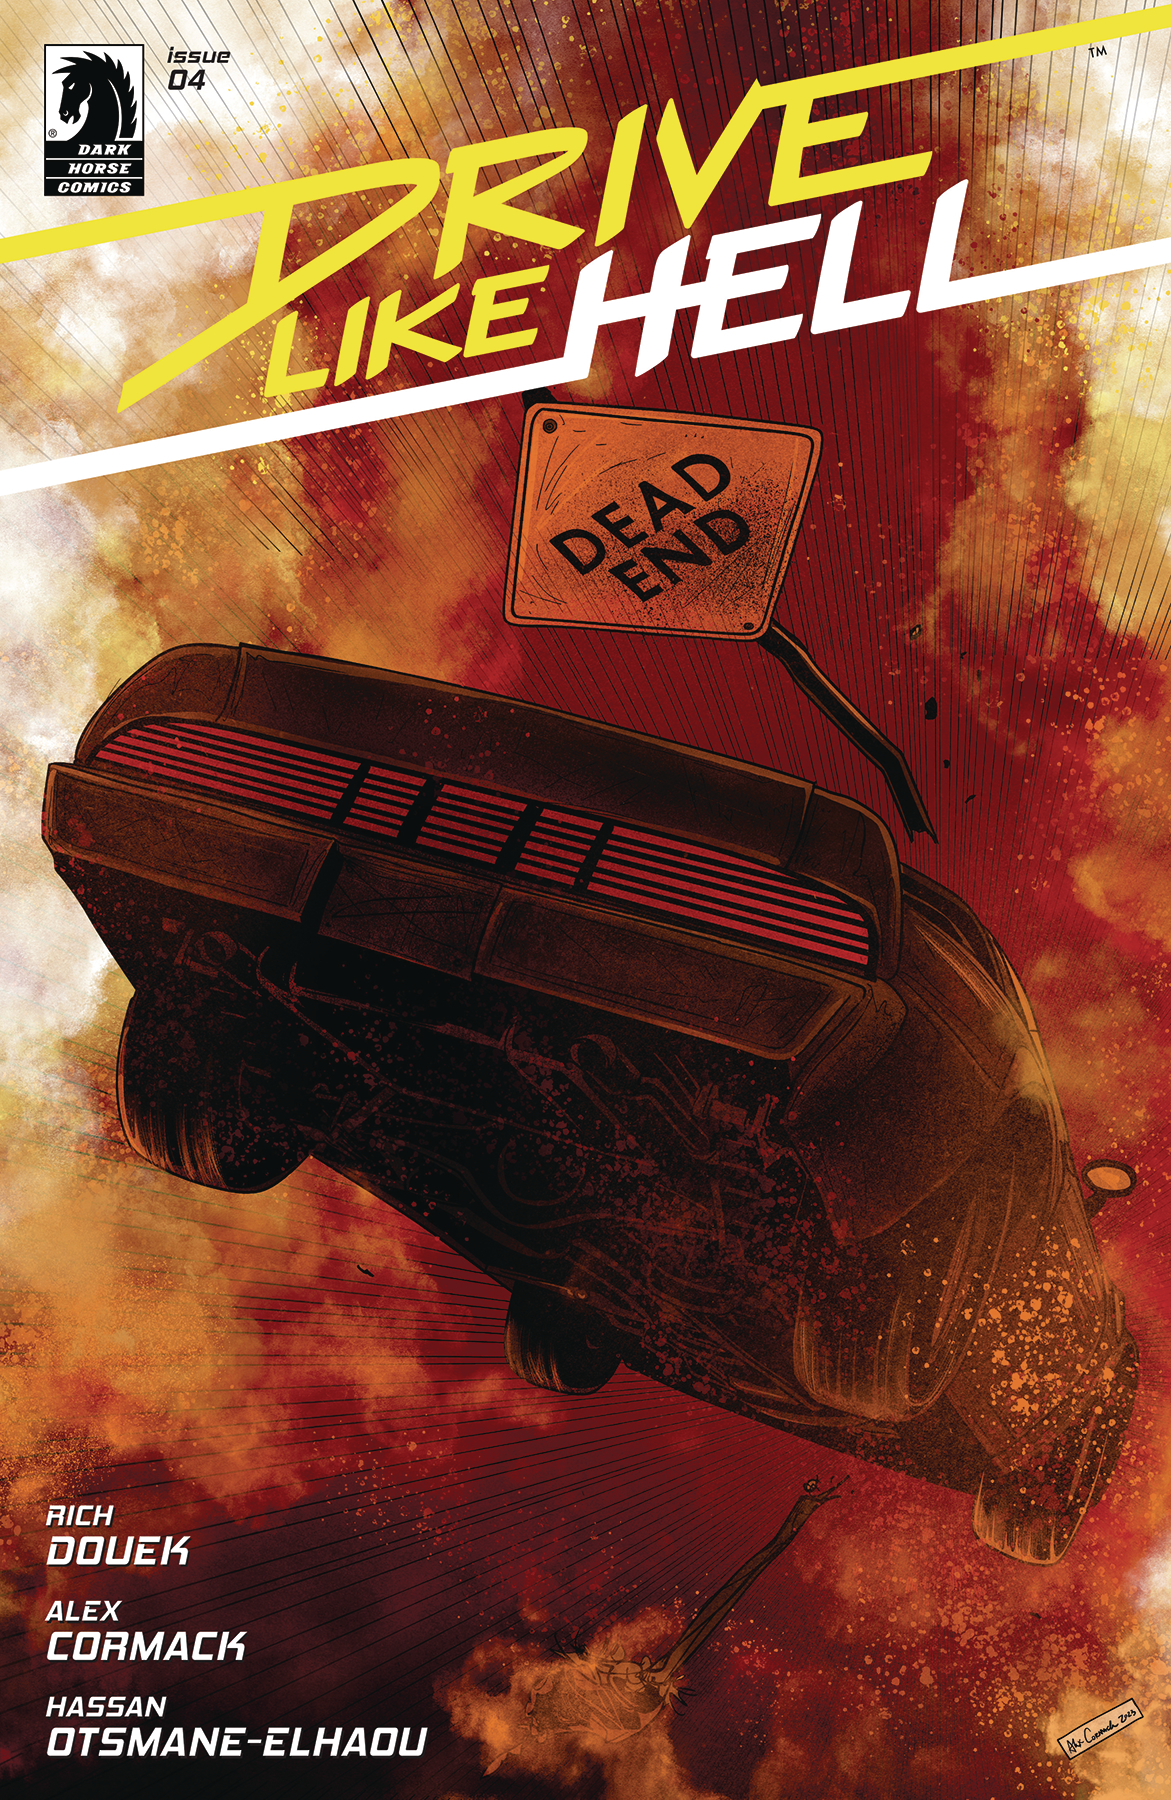 Drive Like Hell #4 Cover A (Alex Cormack)